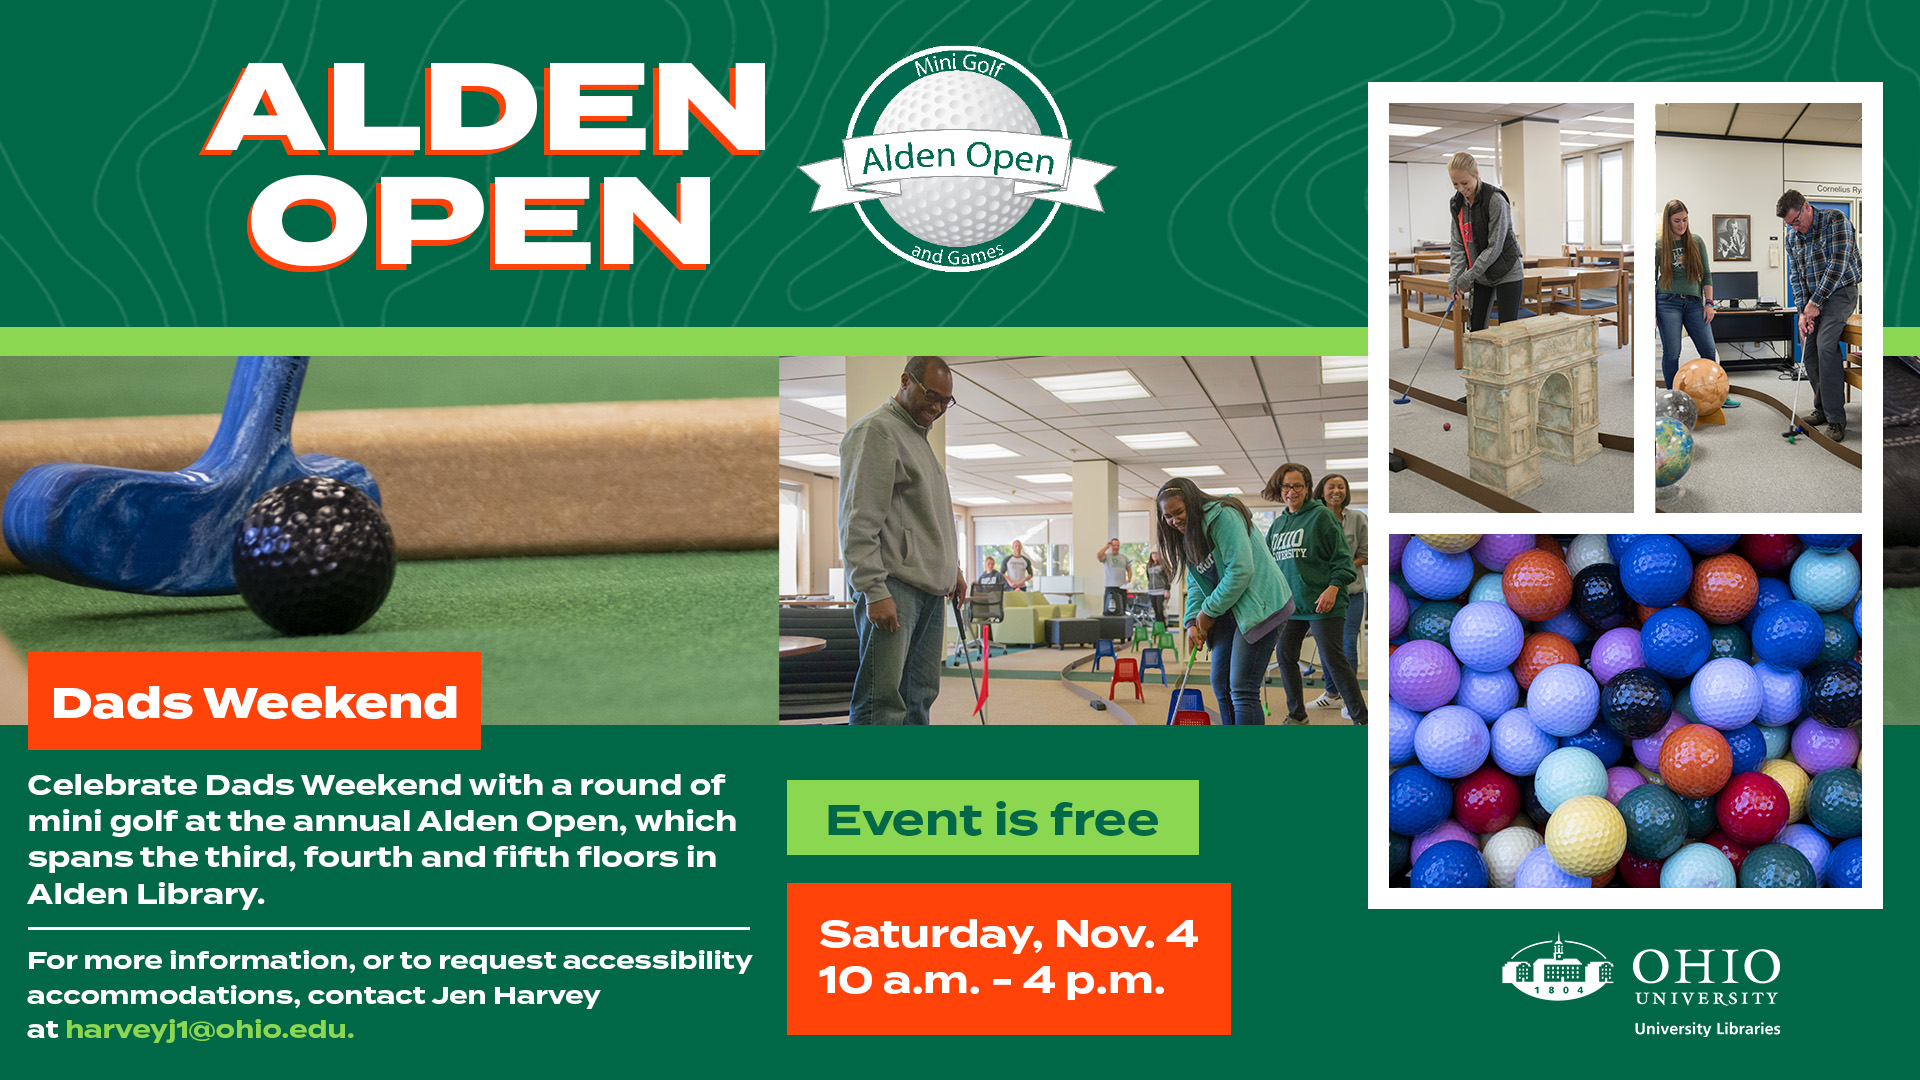 Banner image featuring images from past Alden Open events and details as described below.